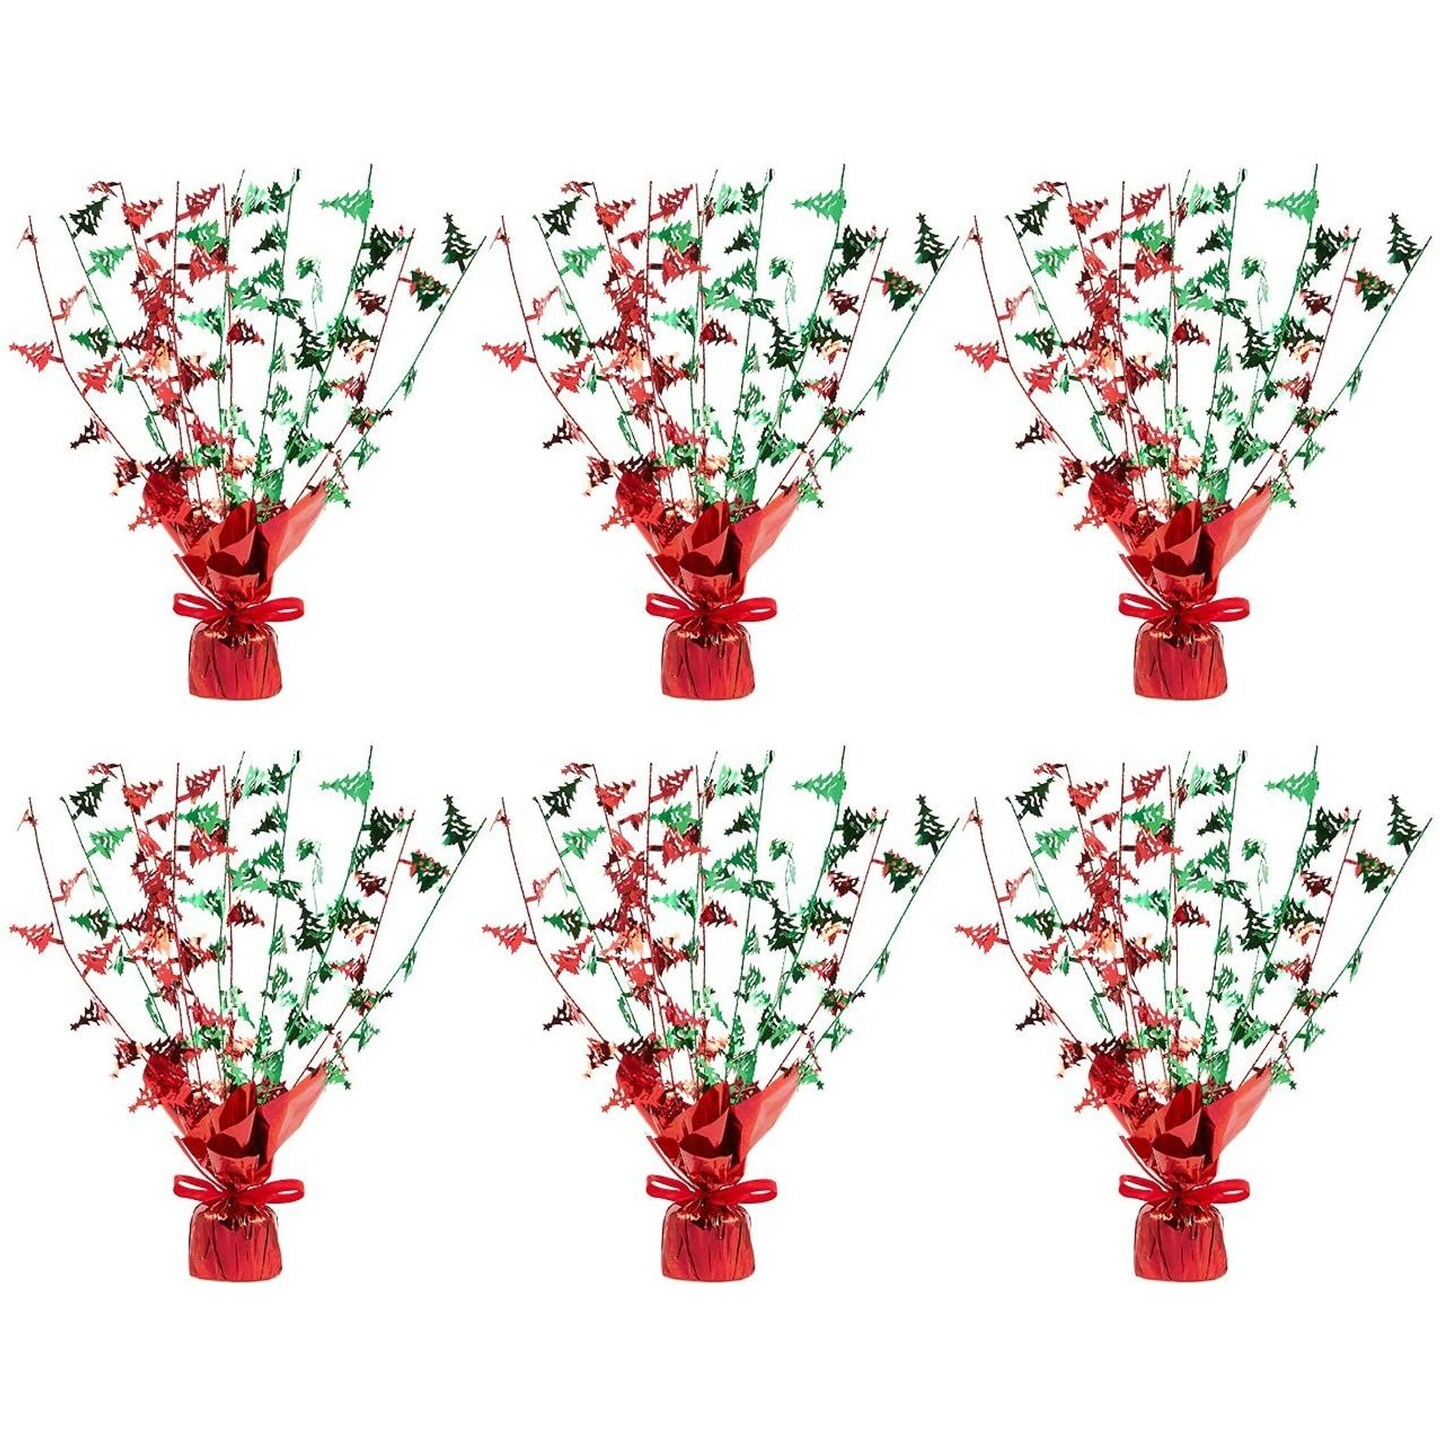 6 Pack Christmas Centerpieces, Balloon Weight for Indoor Dining Room Tables, Xmas Holiday Decorations, Red, 13.5 x 2.3 x 1.7 in.